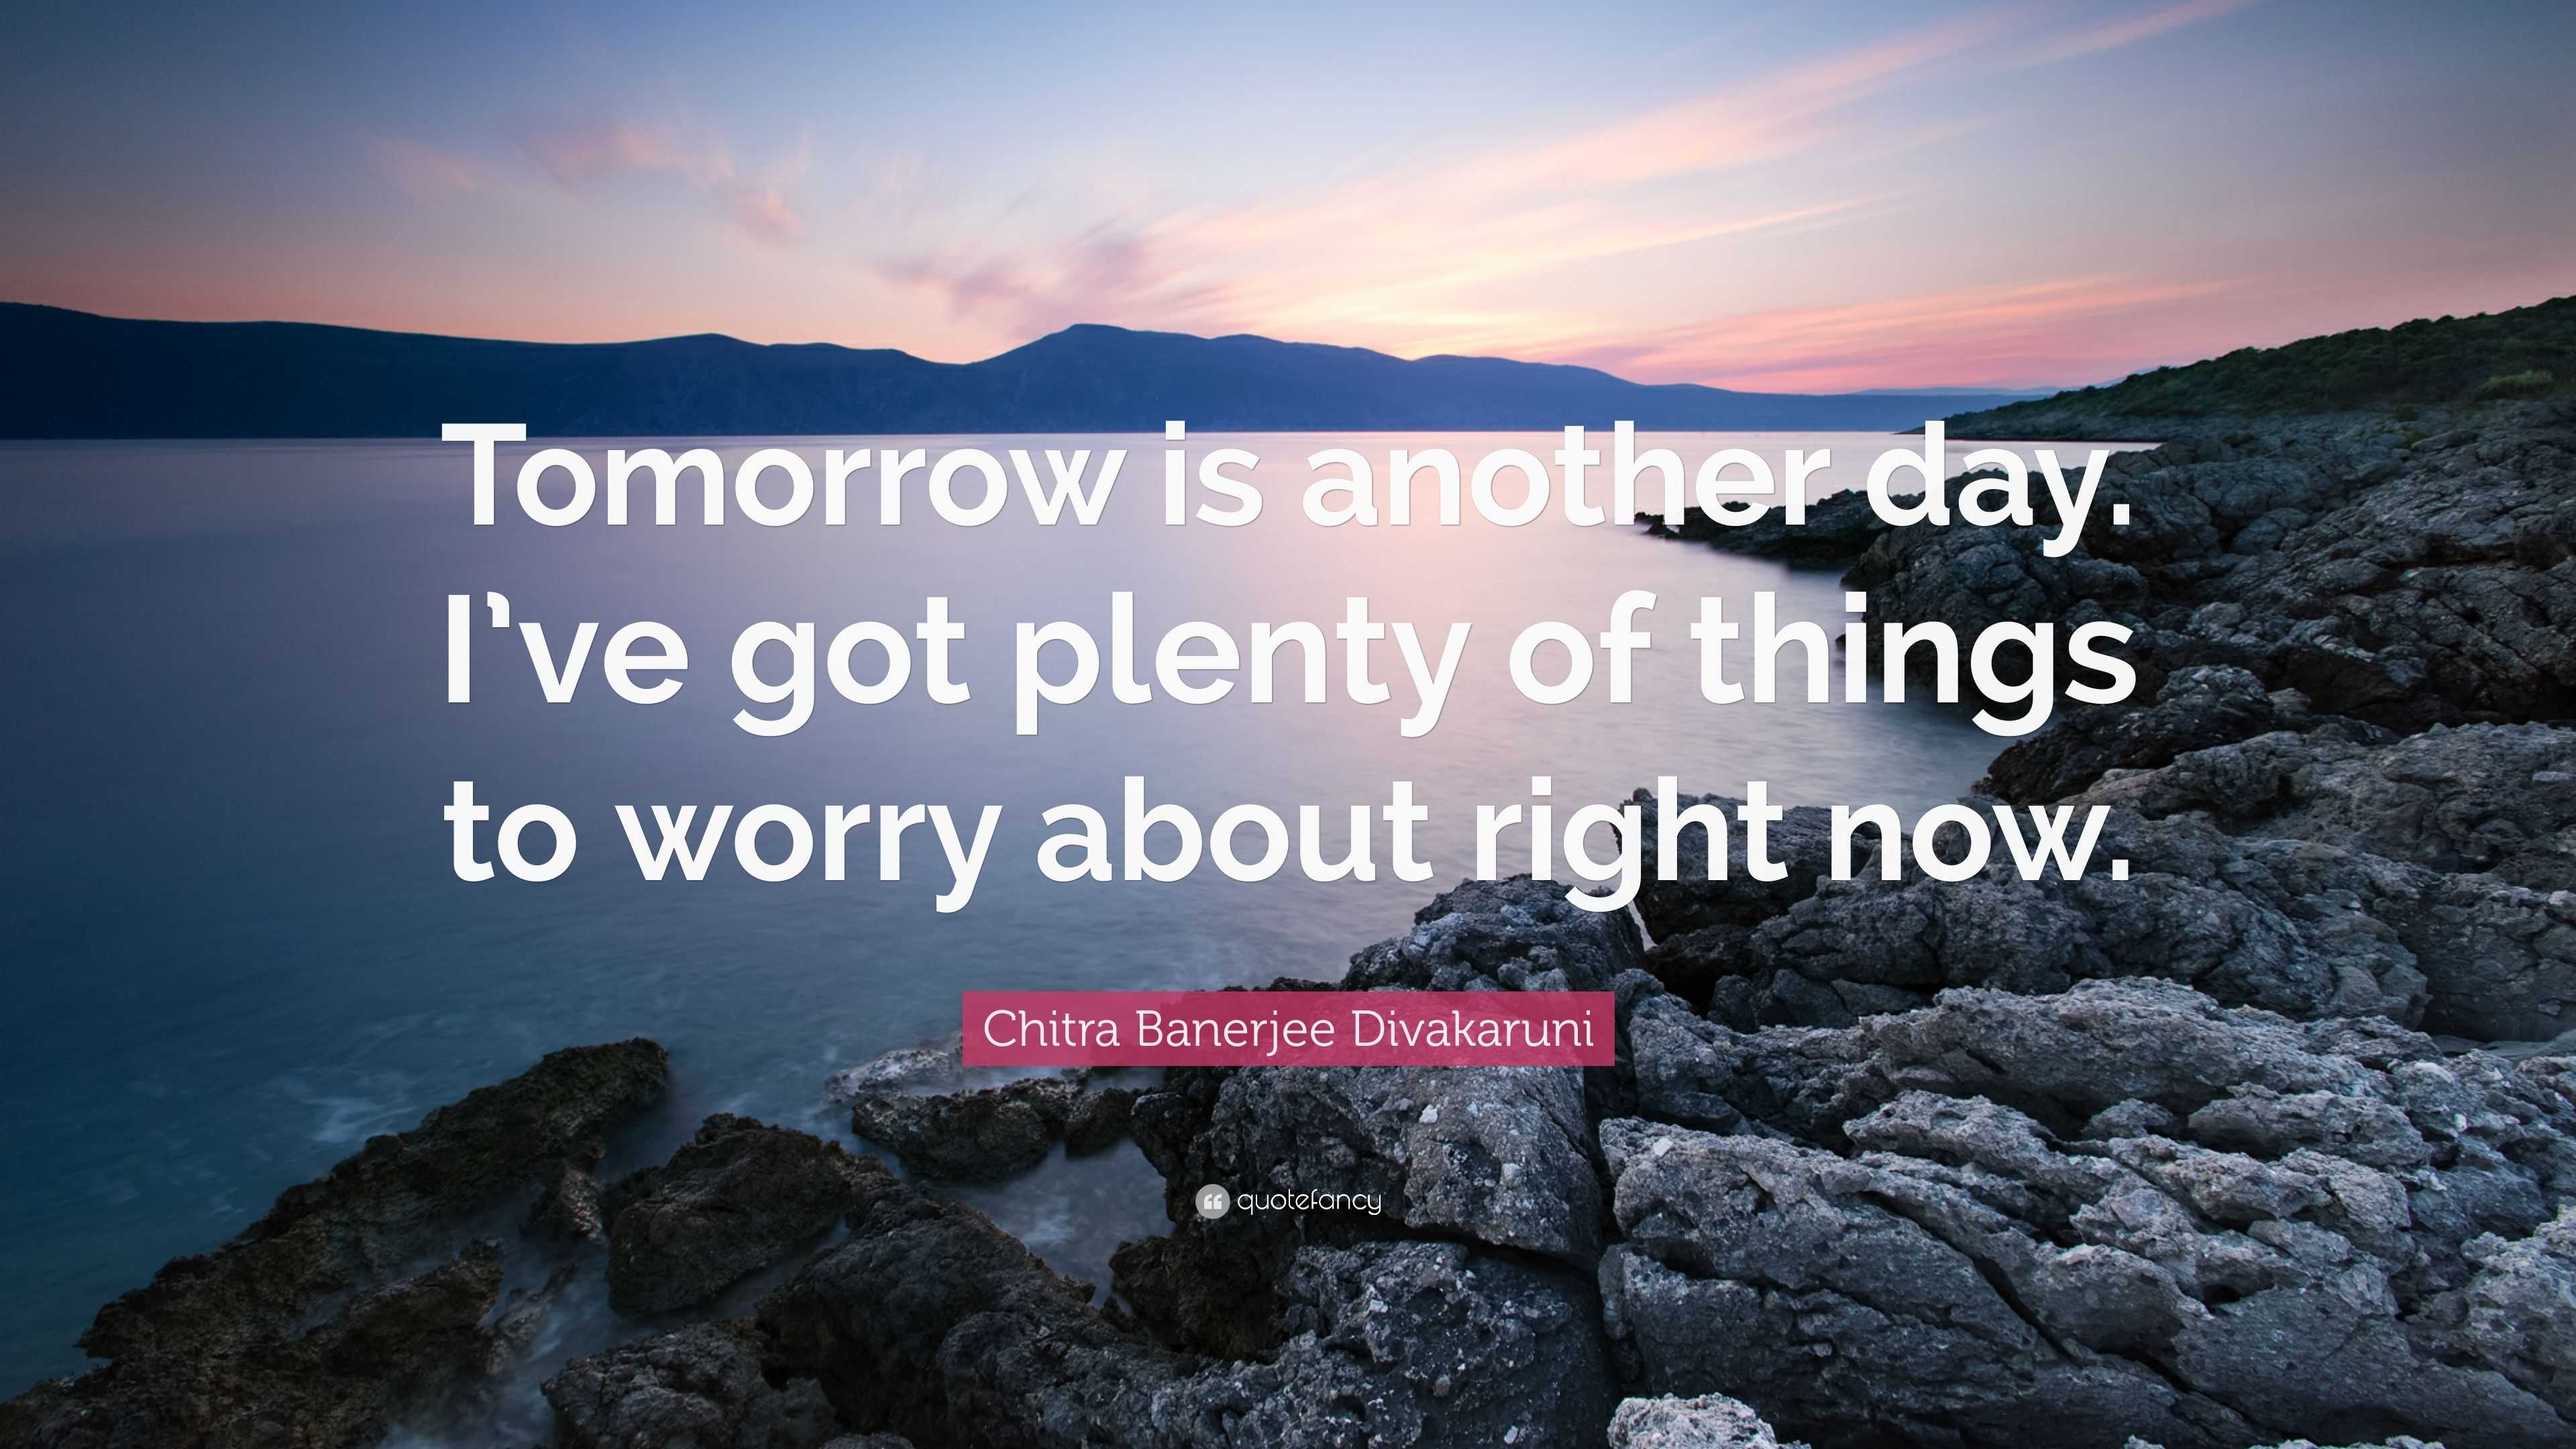 Chitra Banerjee Divakaruni Quote: “Tomorrow is another day. I’ve got ...